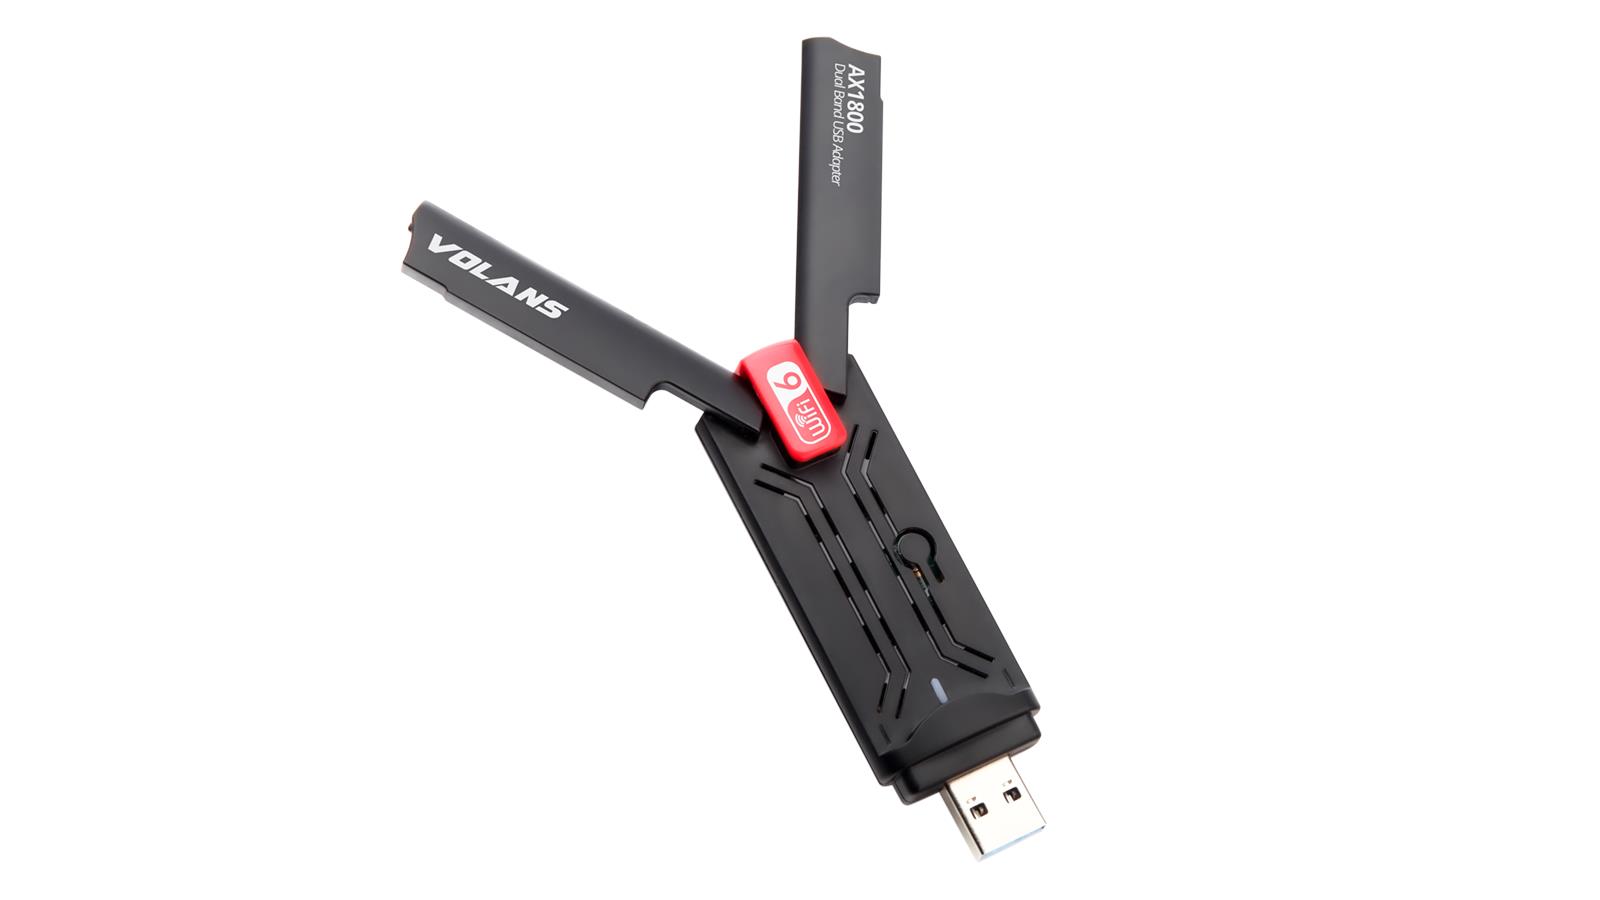 A large marketing image providing additional information about the product Volans AX1800 Wi-Fi 6 USB Adapter - Additional alt info not provided